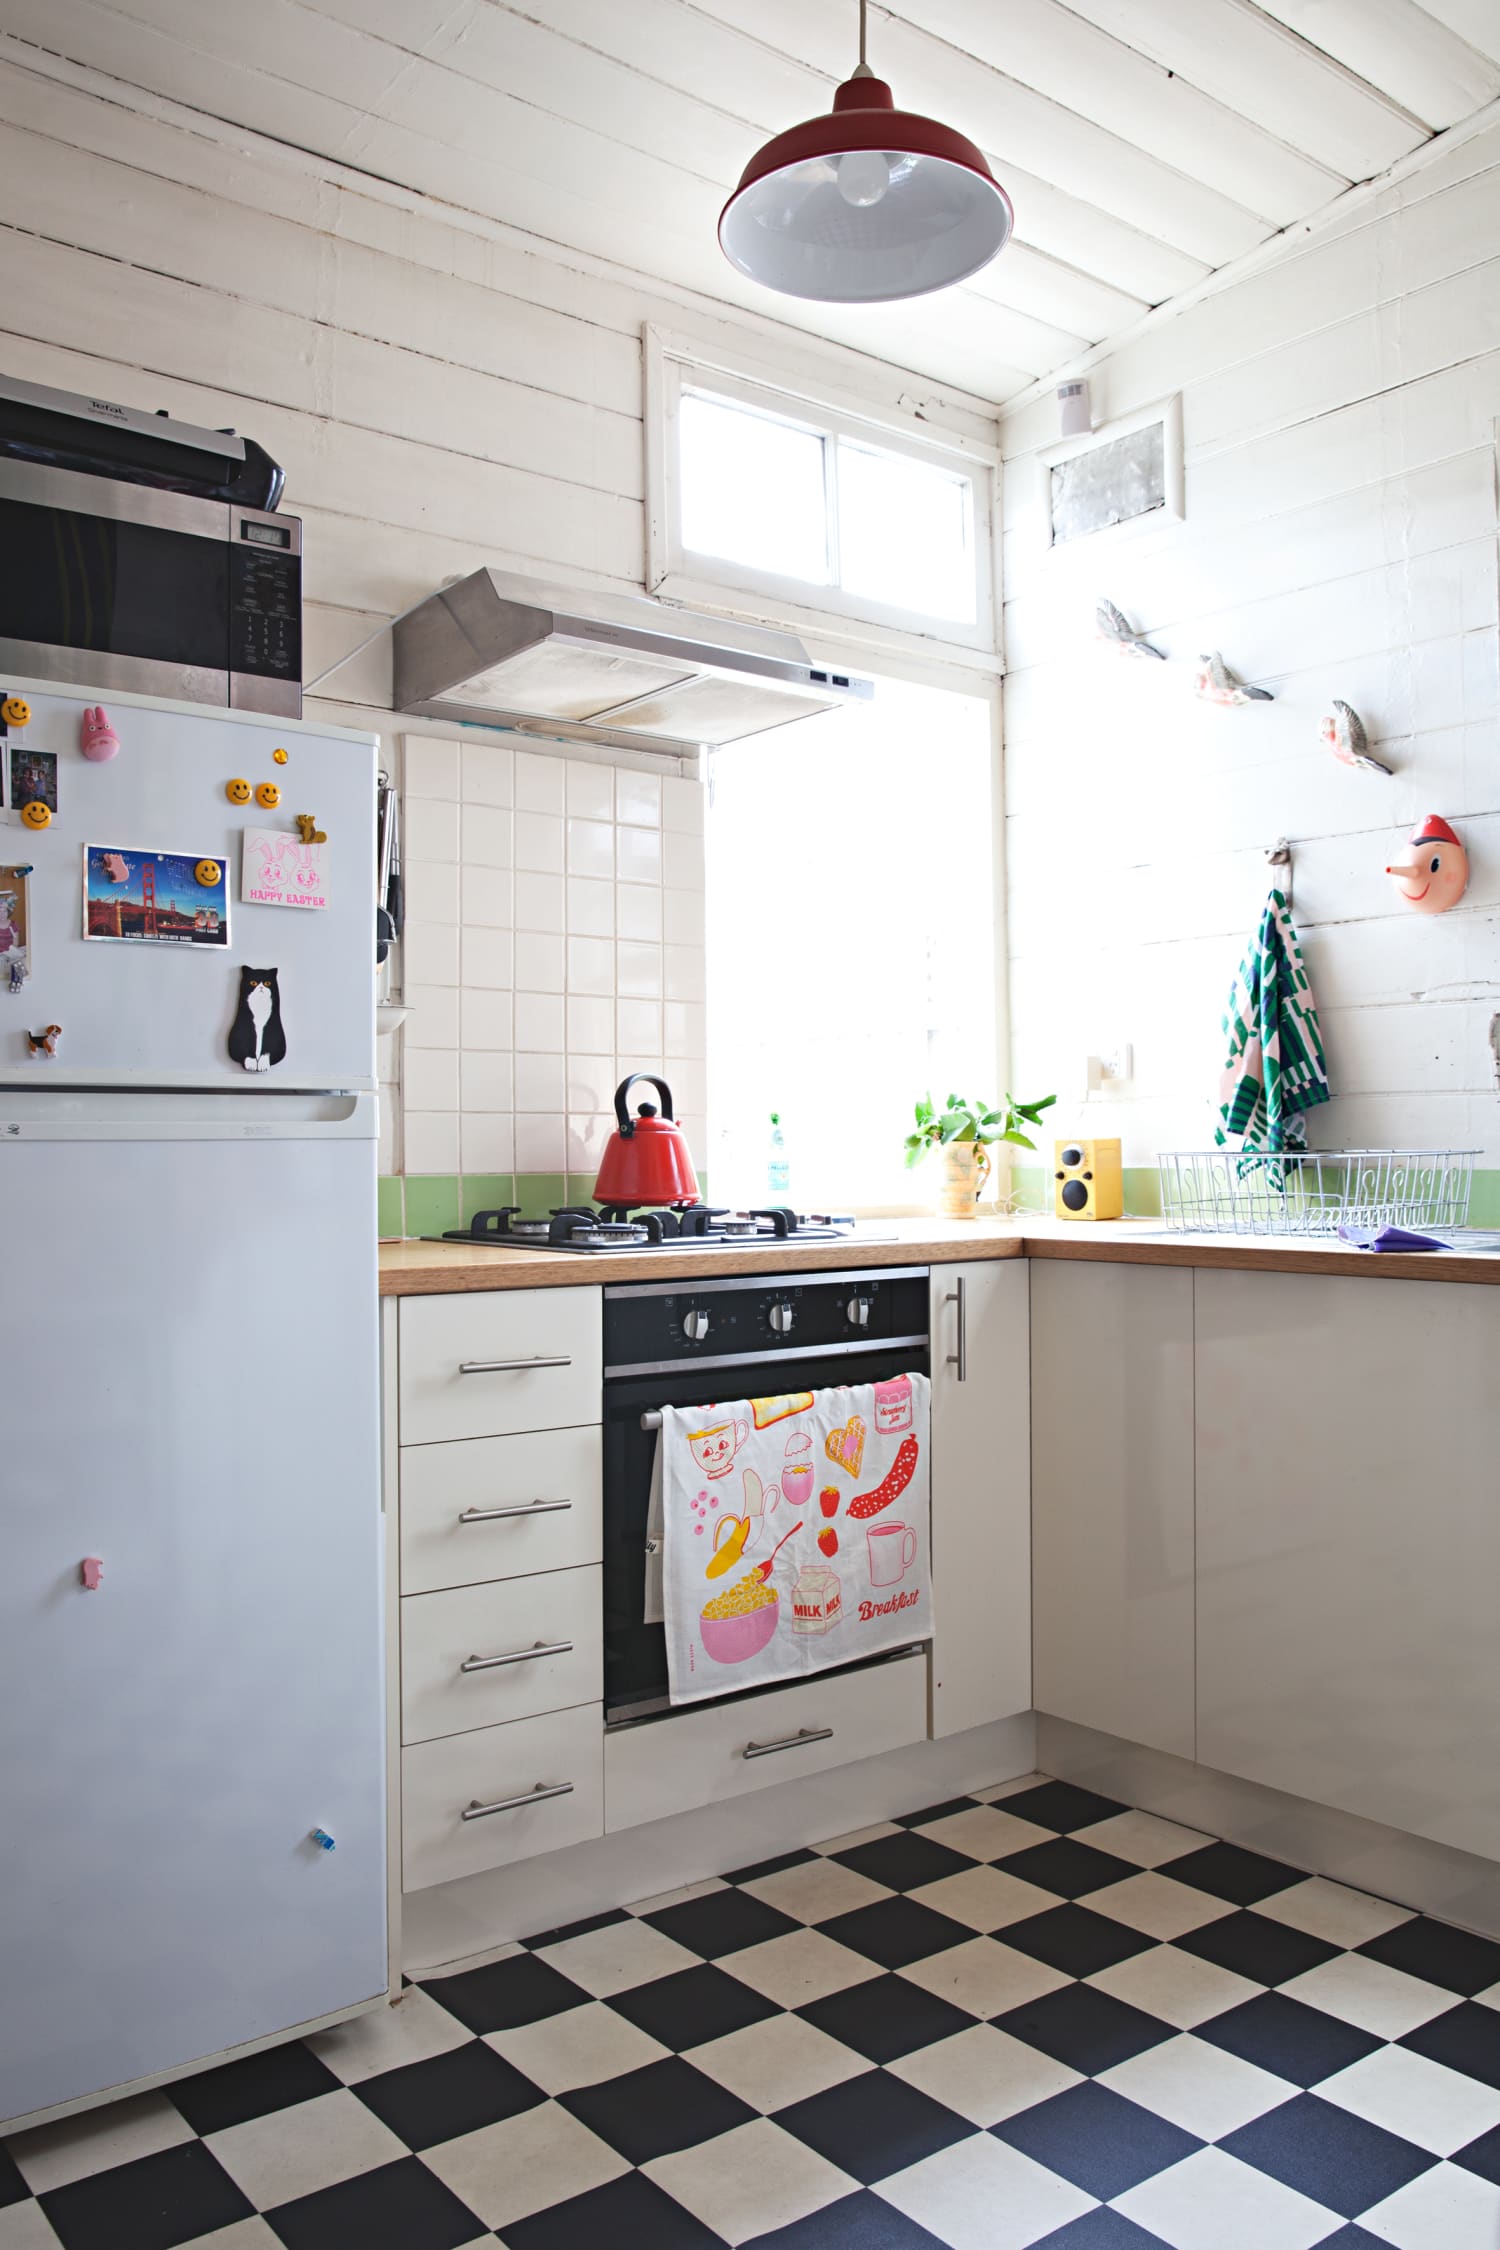 The 21 Best Small Kitchen Ideas of All Time